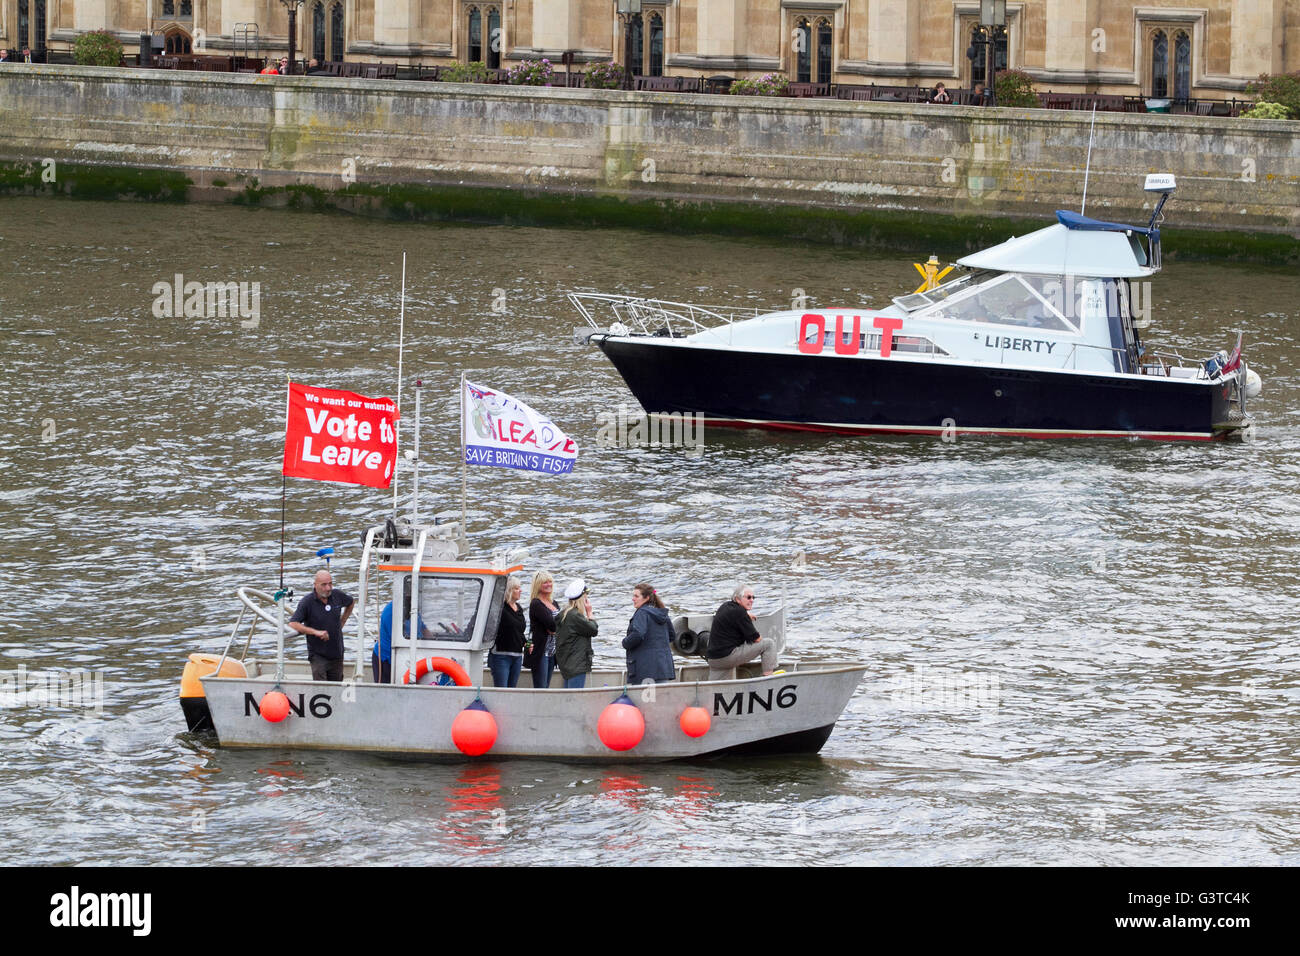 London, UK. 15th June, 2016. Vote for Leave fishing boat Flotilla made up of 30 vessels sail from Tower Bridge on River Thames to Parliament for Pro Brexit Campaign led by UKIP Leader Nigel Farage against the European Common fisheries polic Credit:  amer ghazzal/Alamy Live News Stock Photo